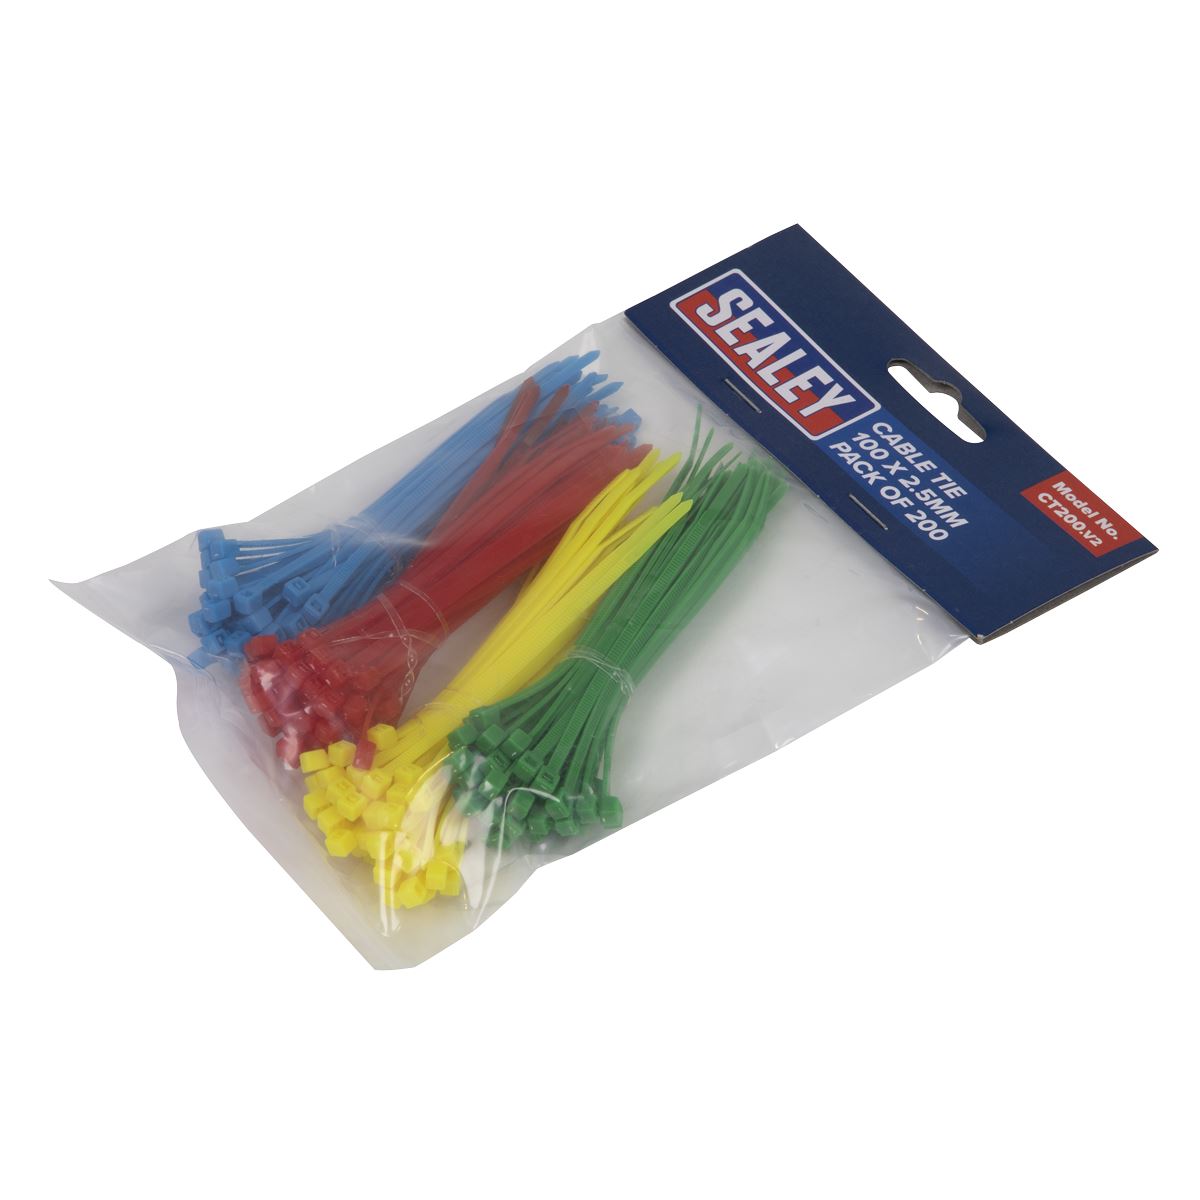 Sealey Cable Tie 100 x 2.5mm Pack of 200 CT200